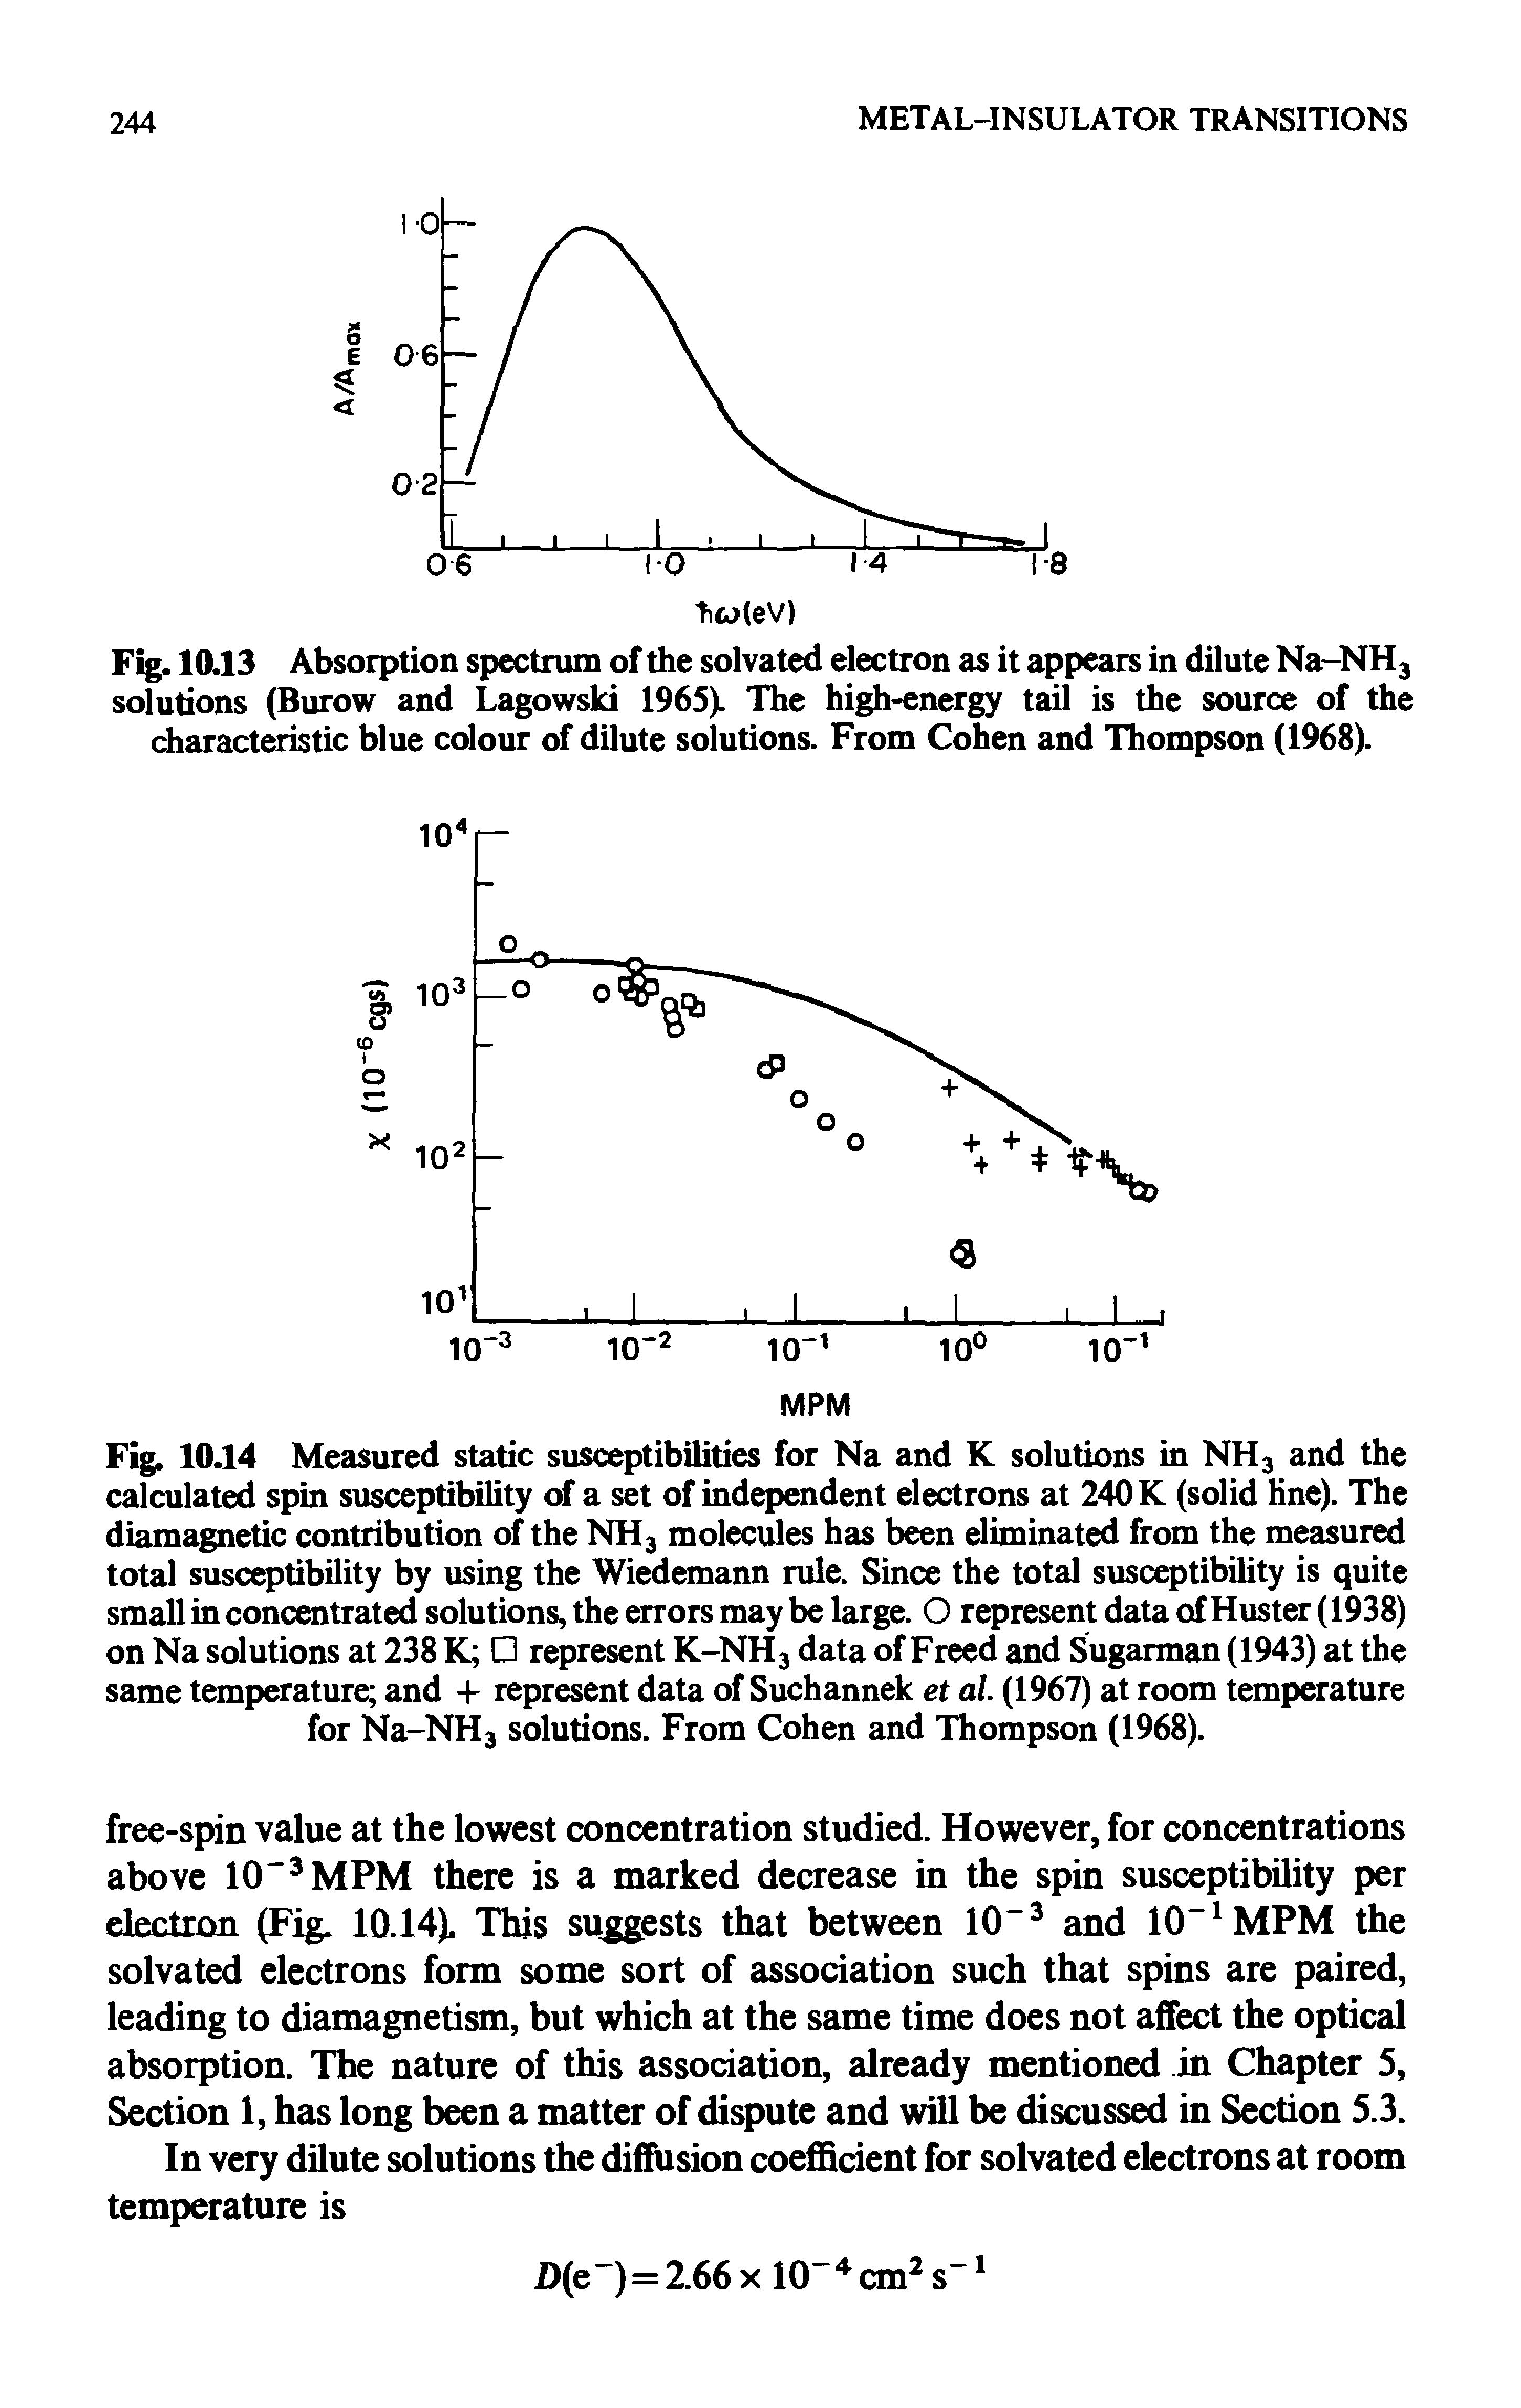 Fig. 10.13 Absorption spectrum of the solvated electron as it appears in dilute Na-NH3 solutions (Burow and Lagowski 1965). The high-energy tail is the source of the characteristic blue colour of dilute solutions. From Cohen and Thompson (1968).